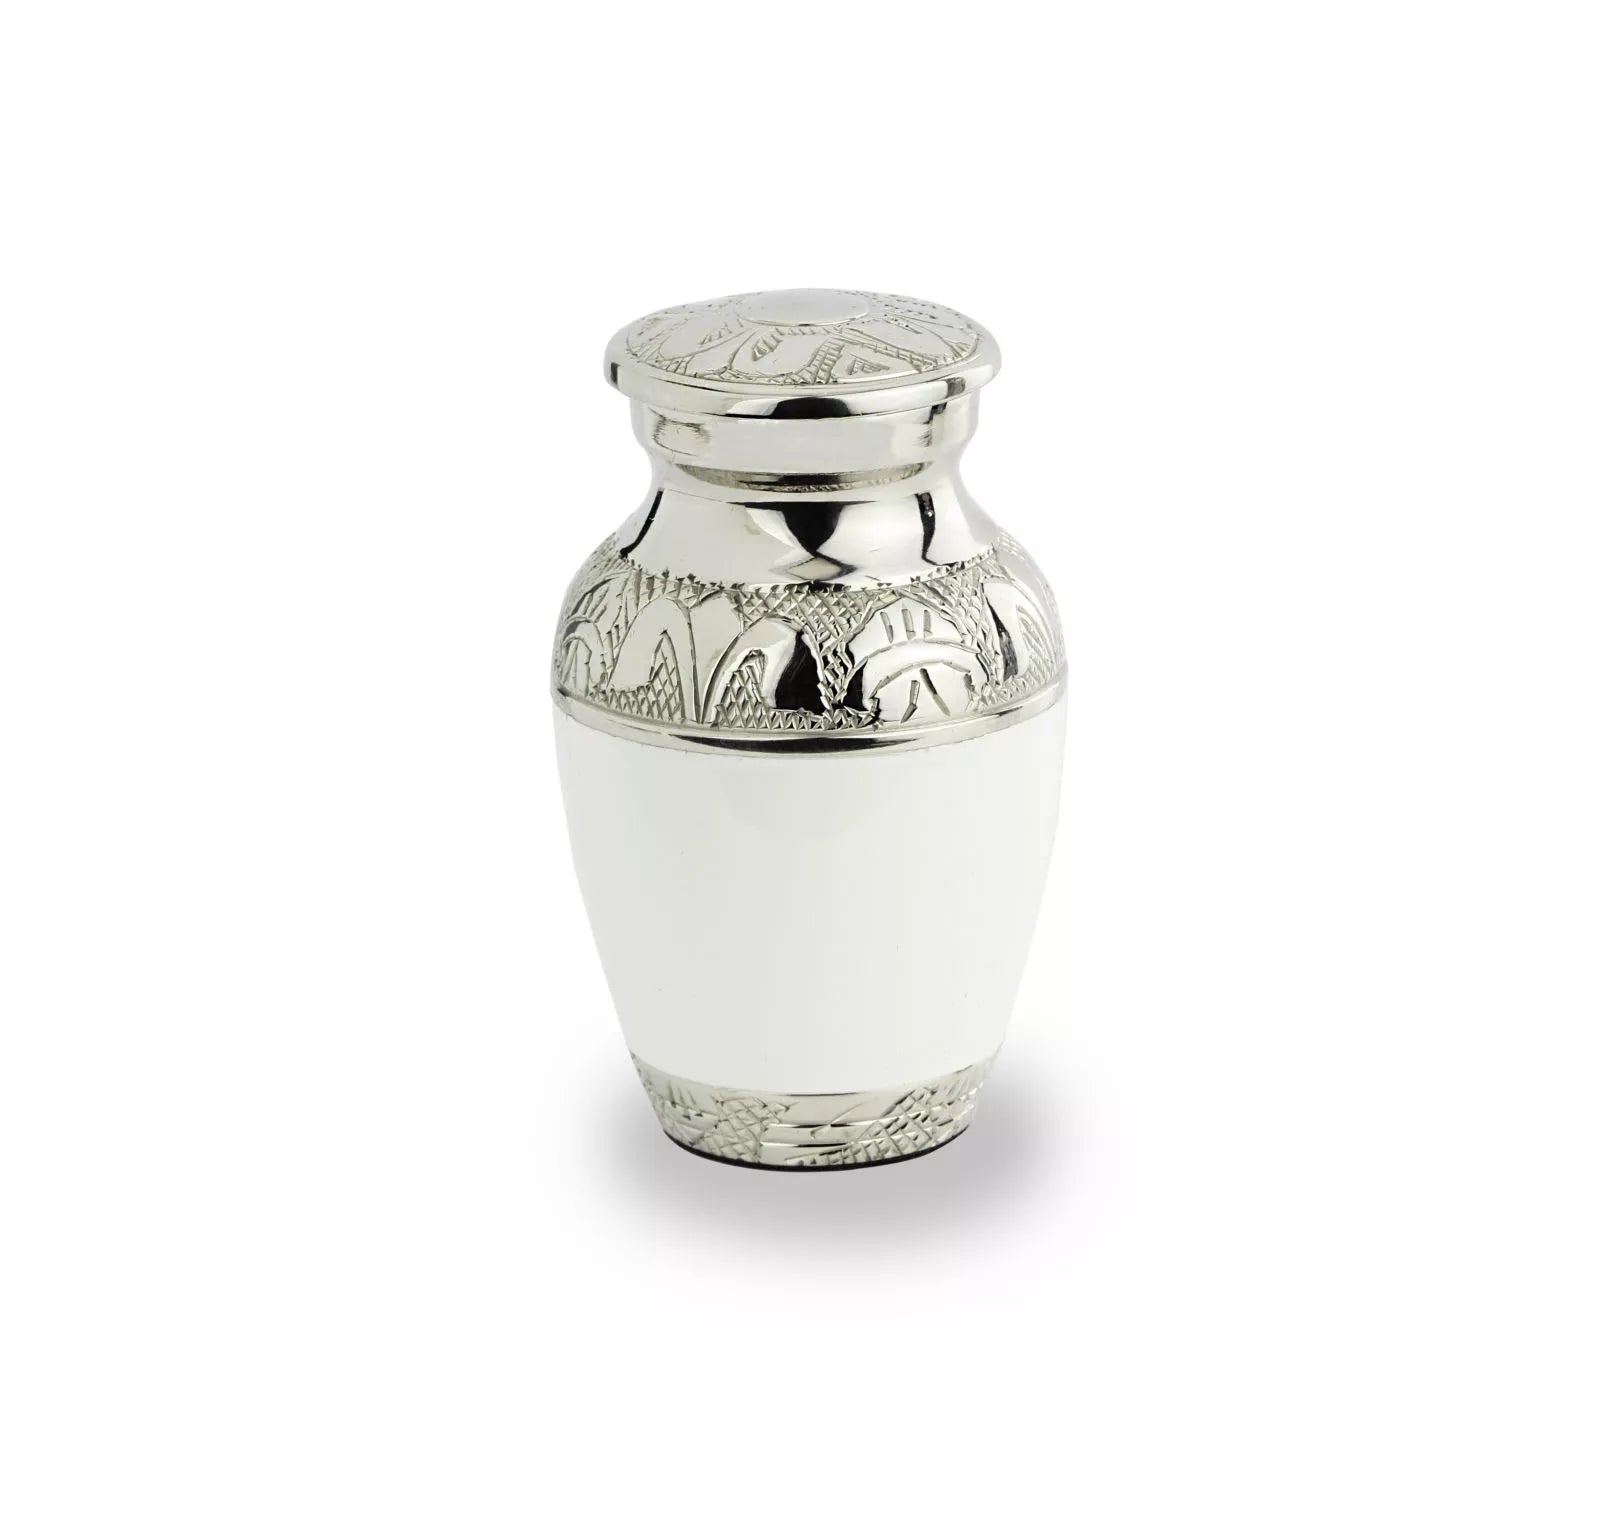 Brass mini urn - mother-of-pearl white with a silver design